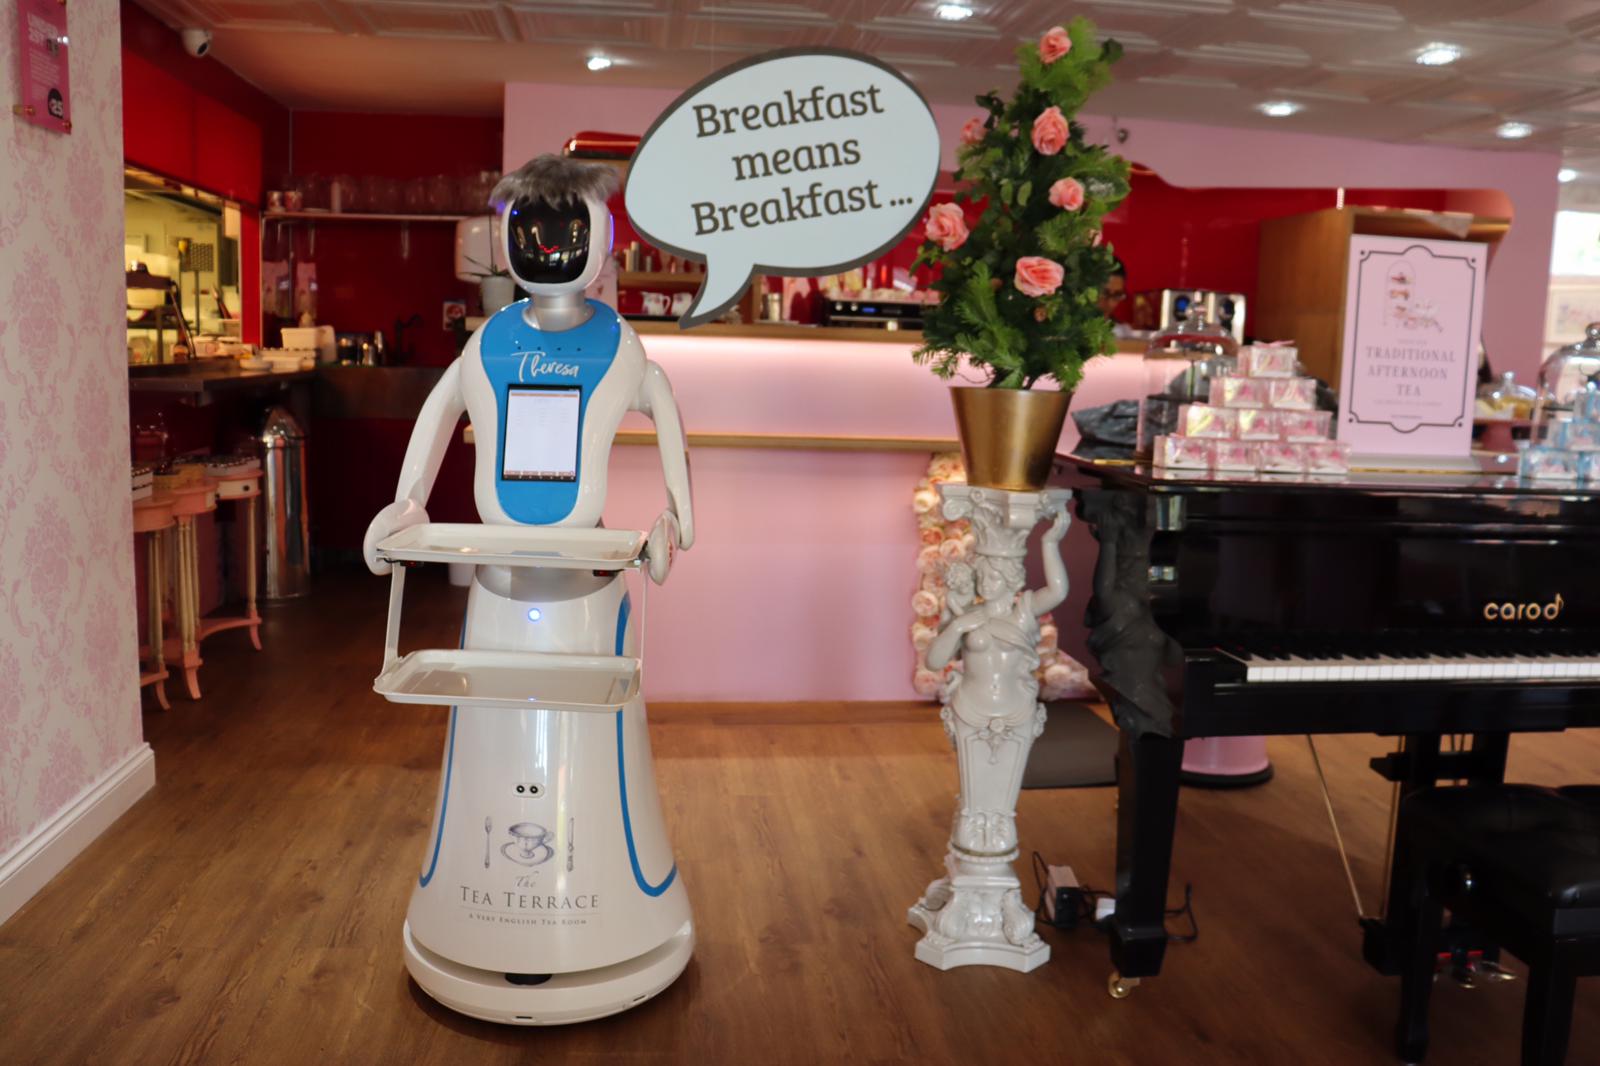 London Tea Room Chain To Reopen With Robots As Waitstaff photo